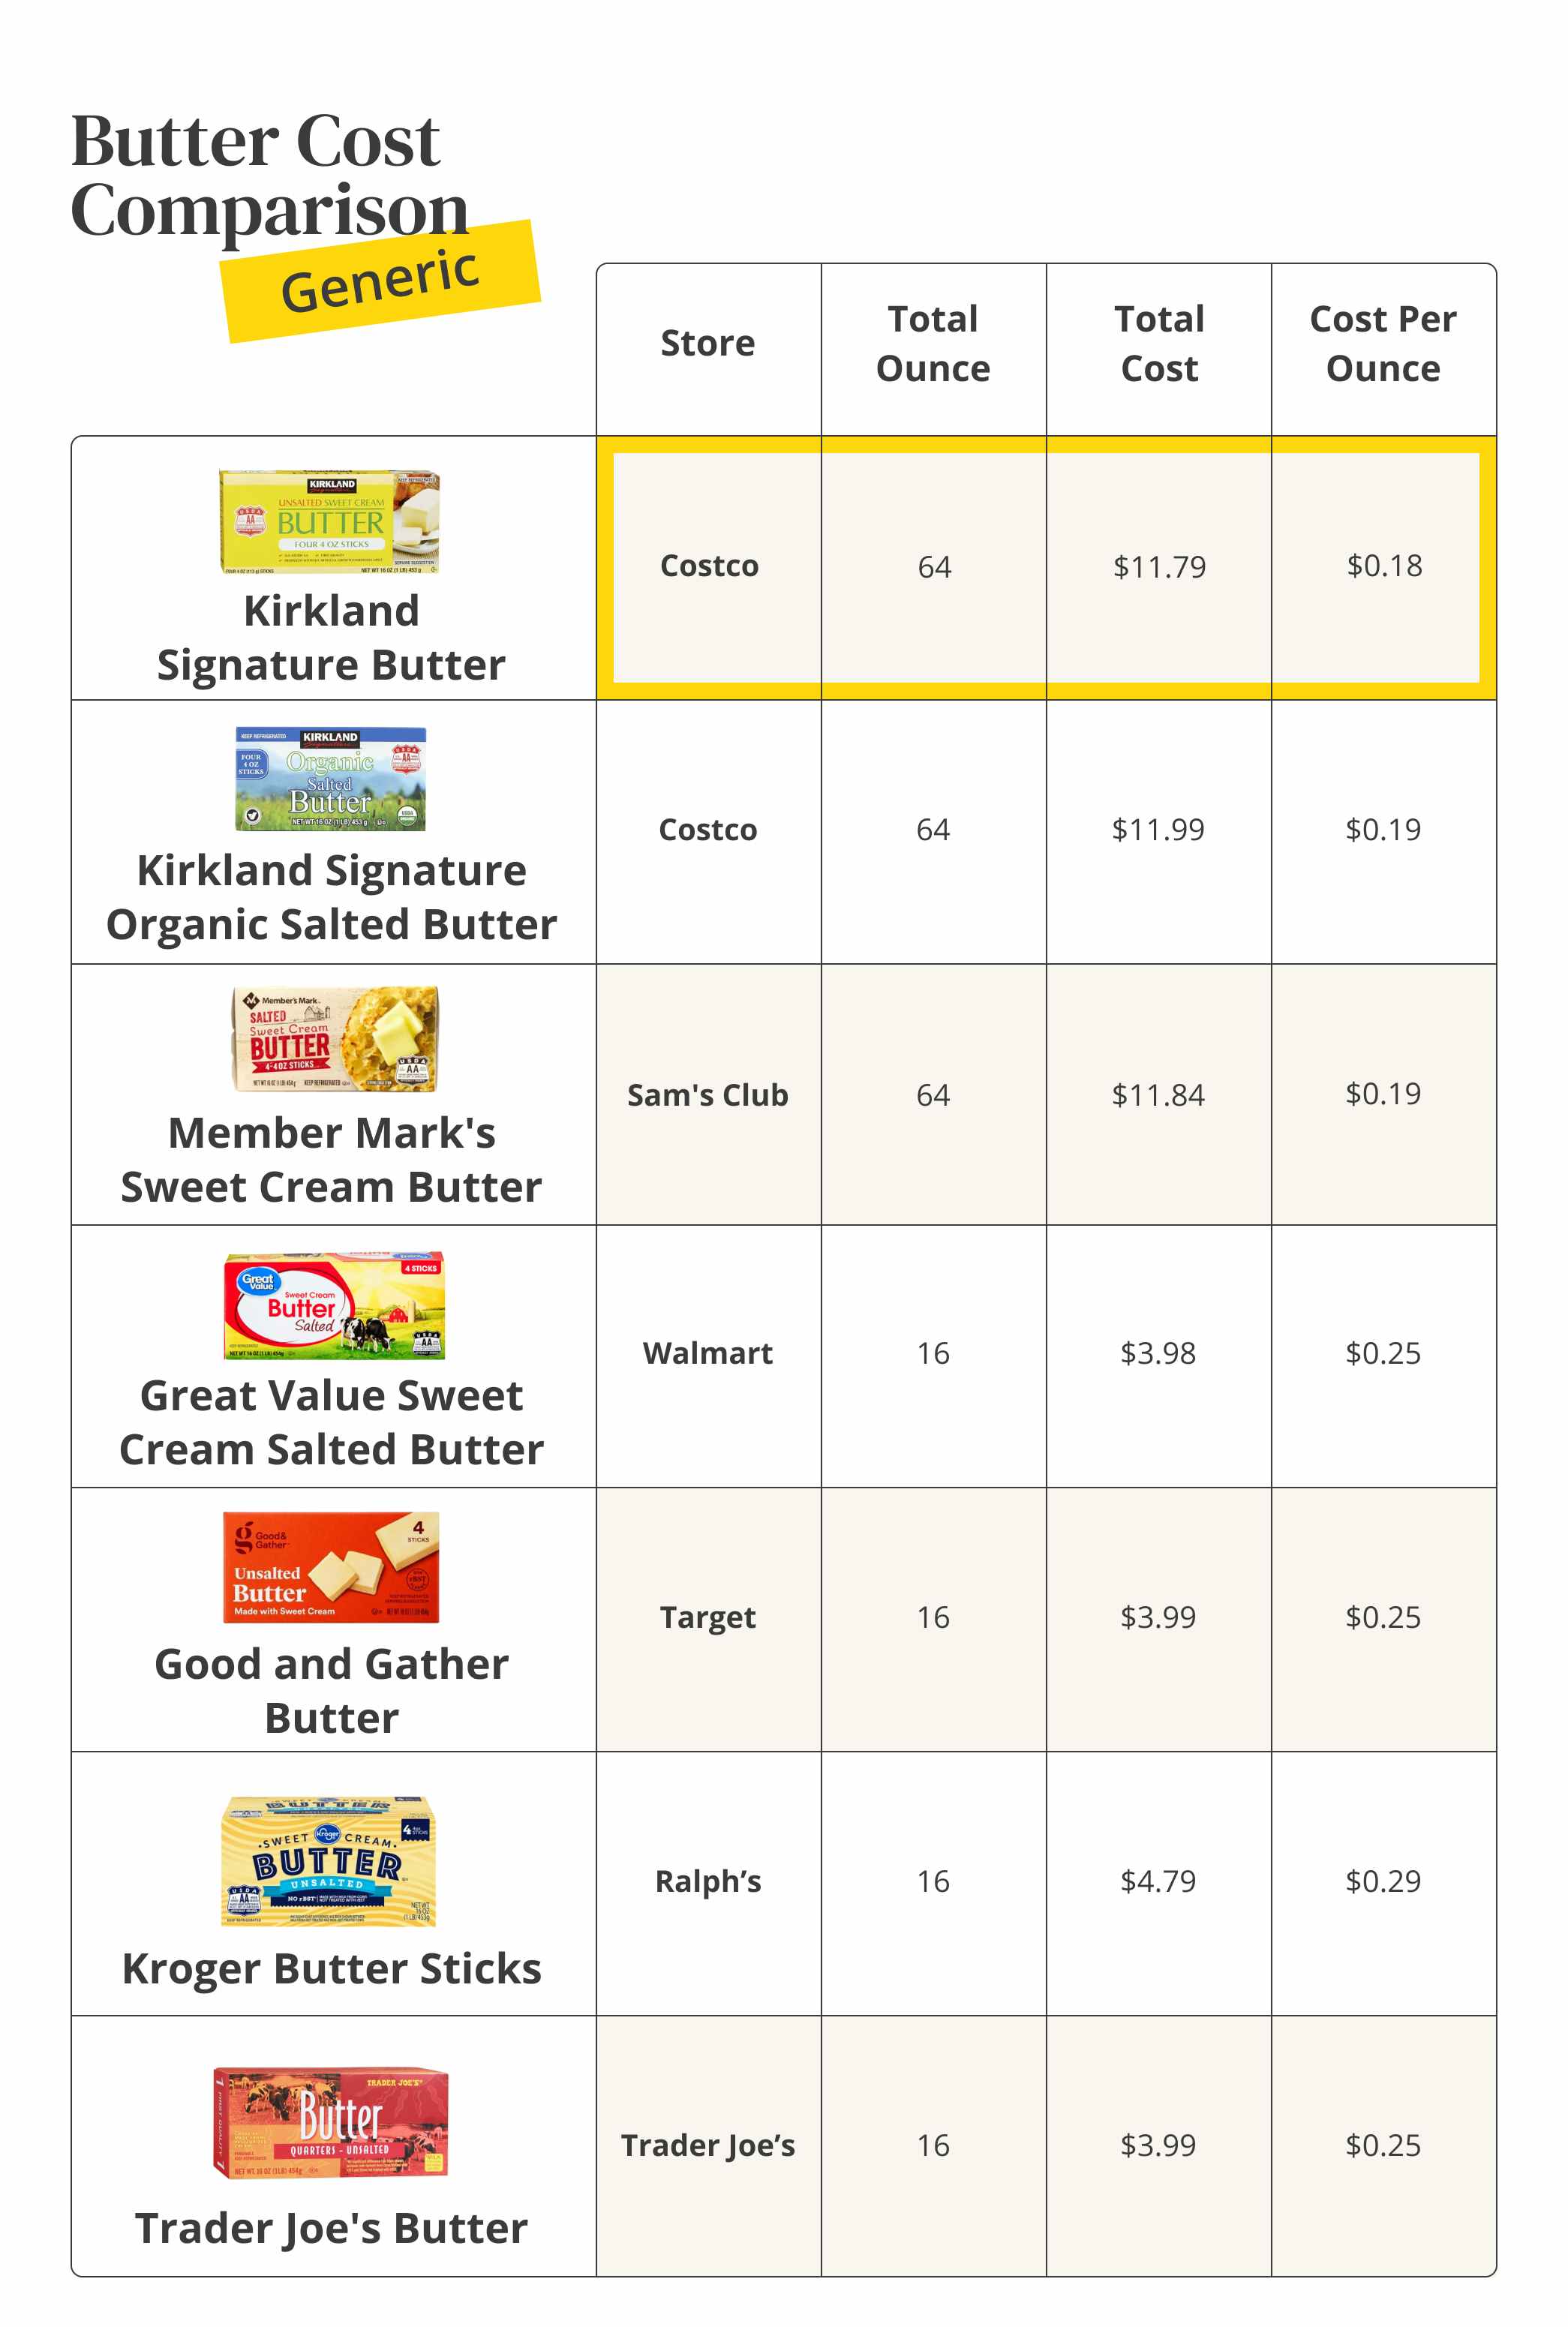 A table comparing costs of generic brand butter